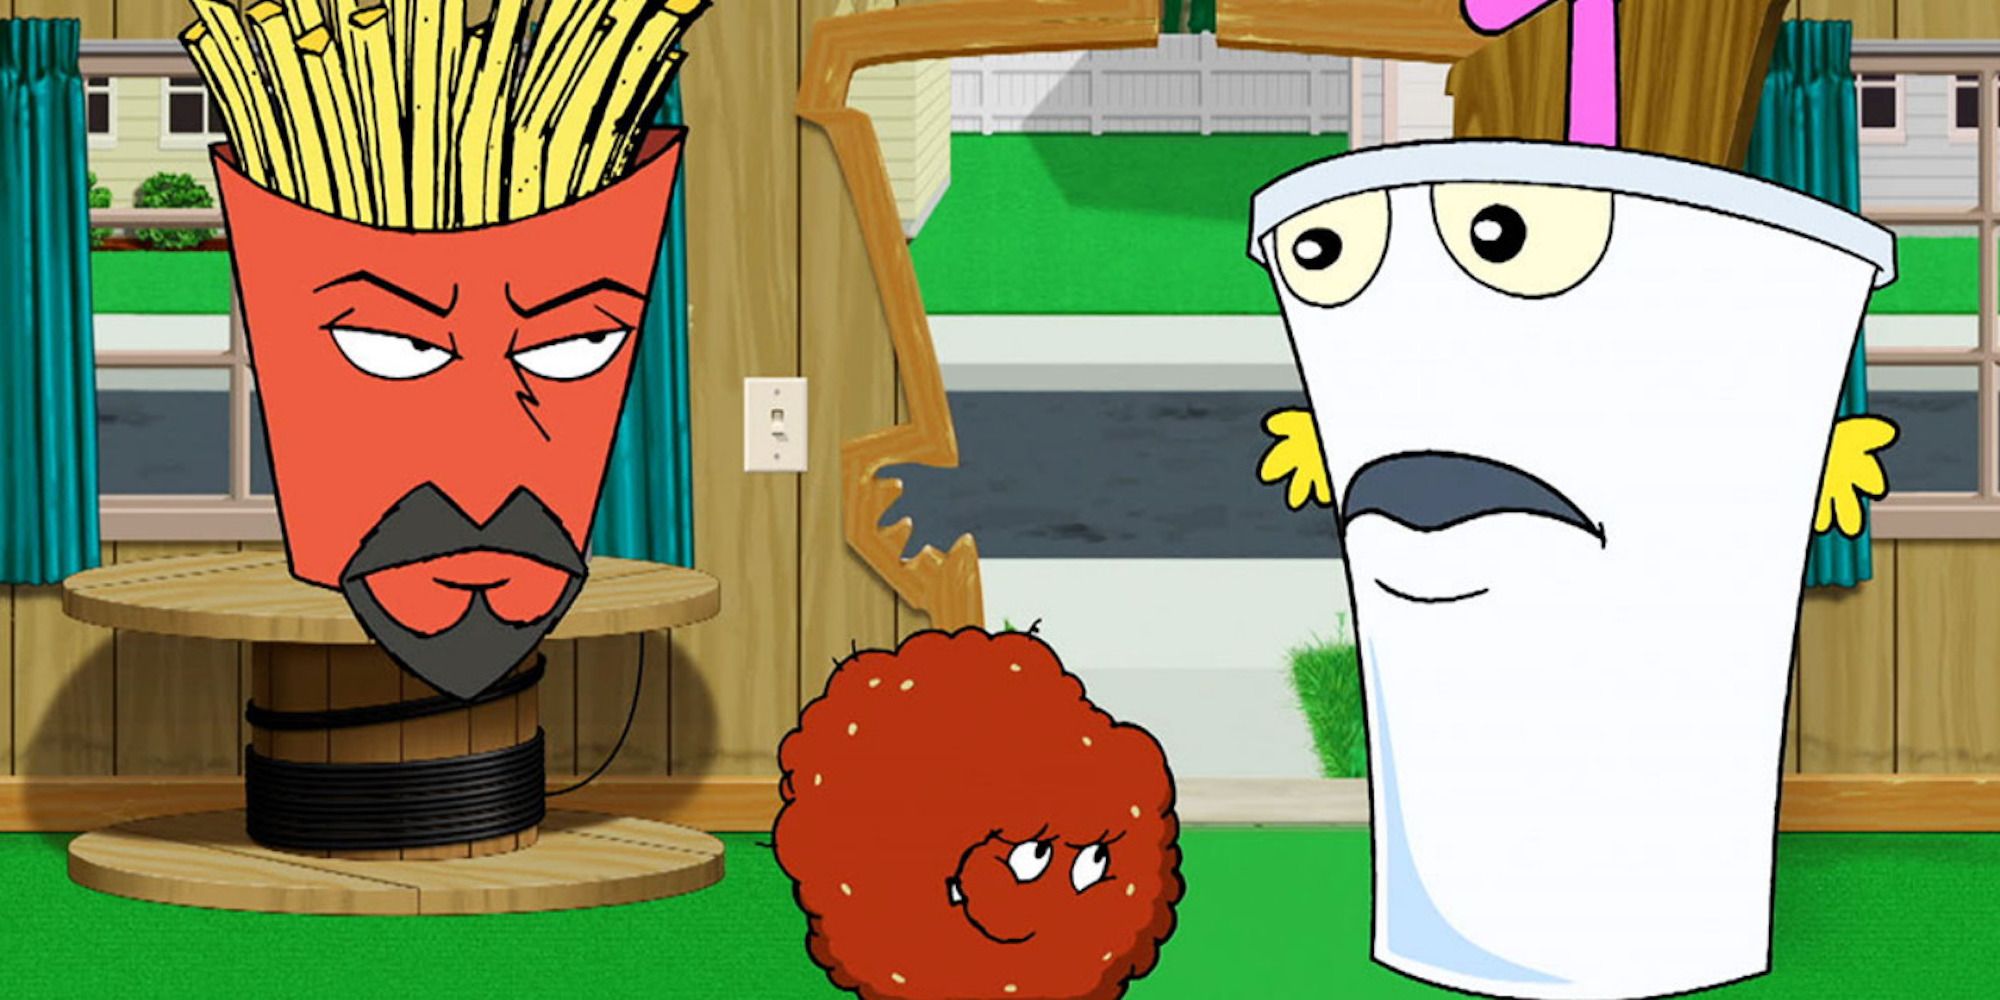 A scene featuring characters in Aqua Teen Hunger Force